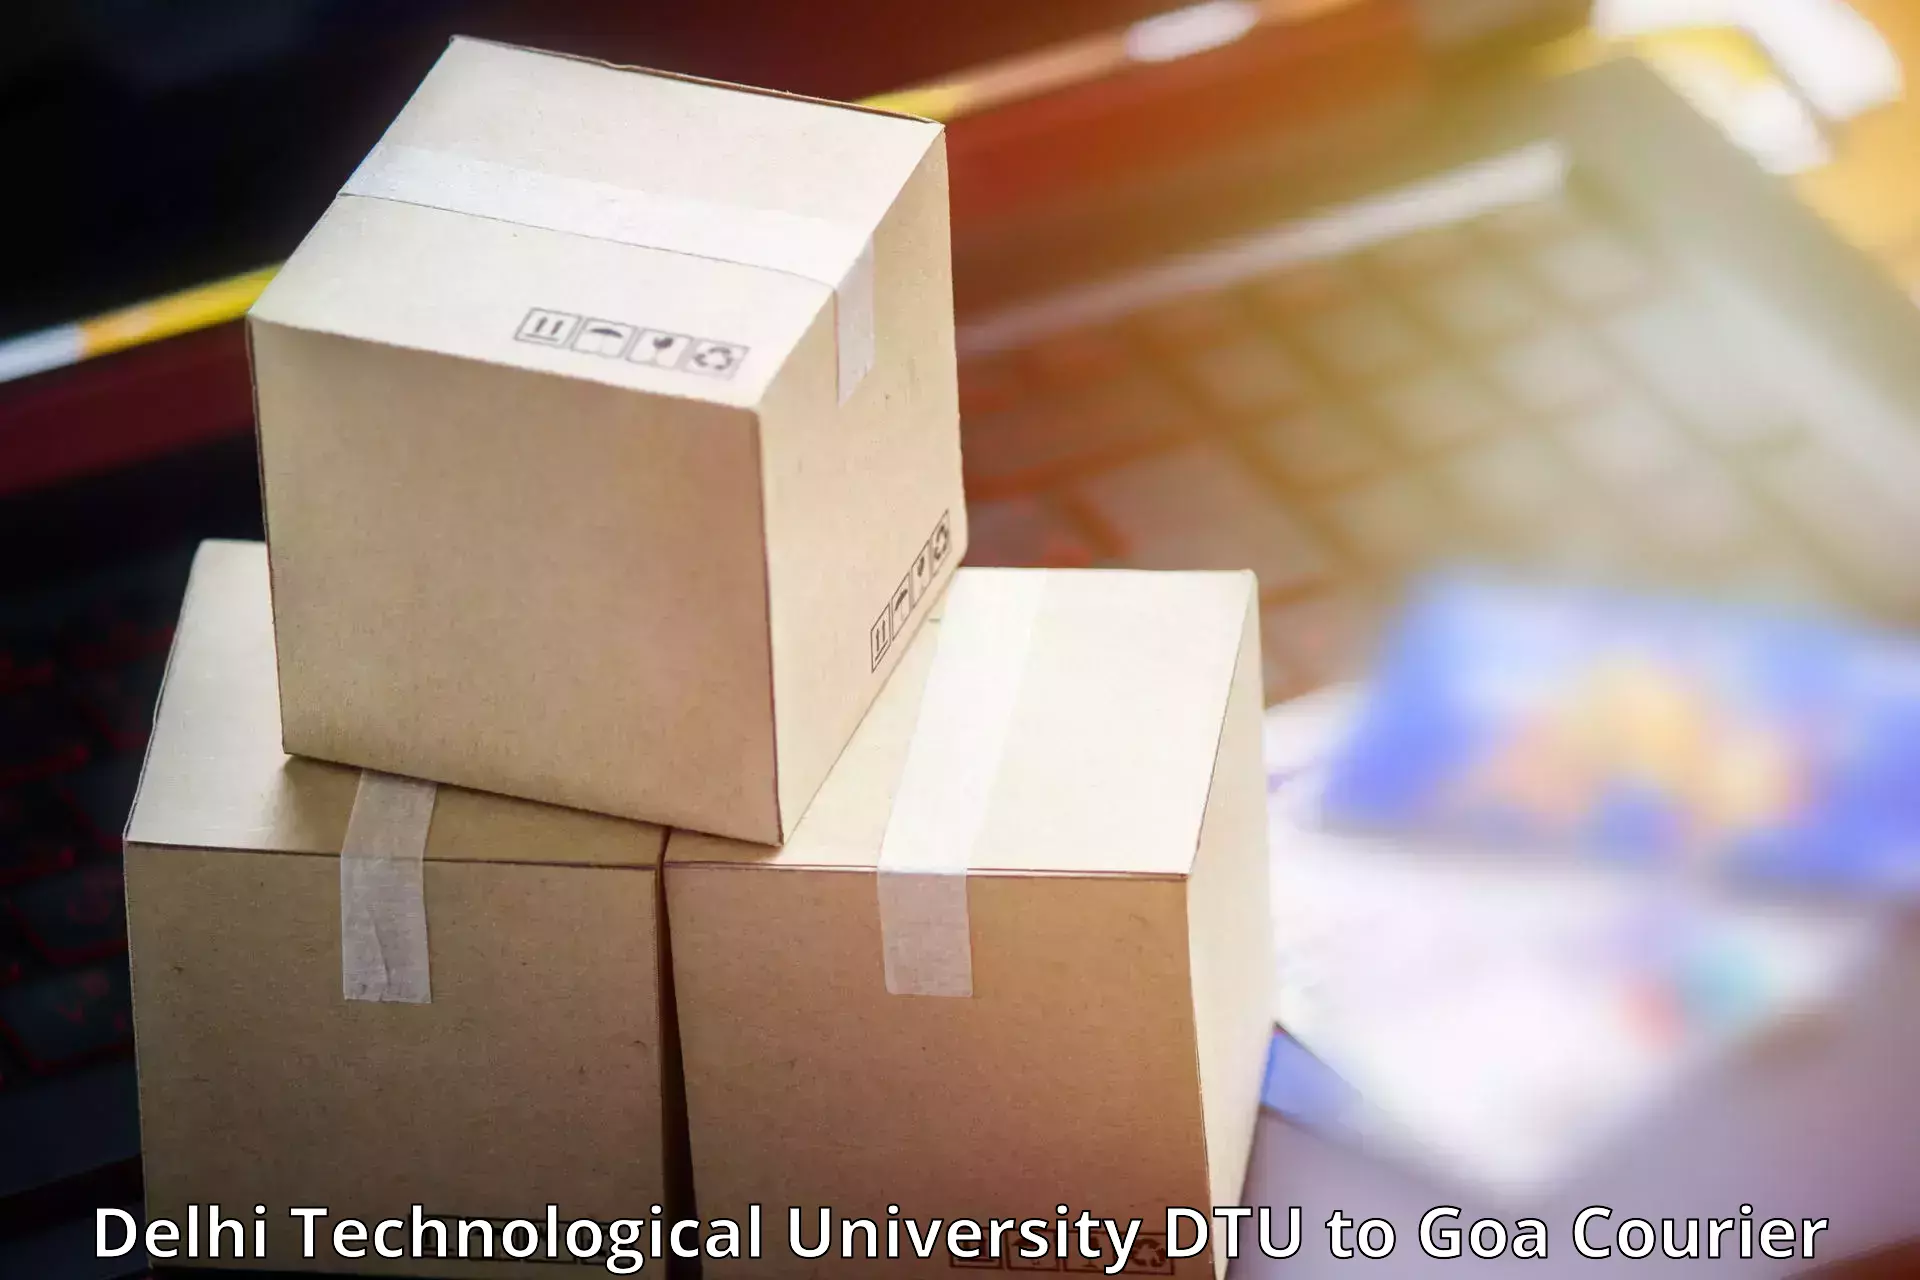 Next day courier in Delhi Technological University DTU to South Goa